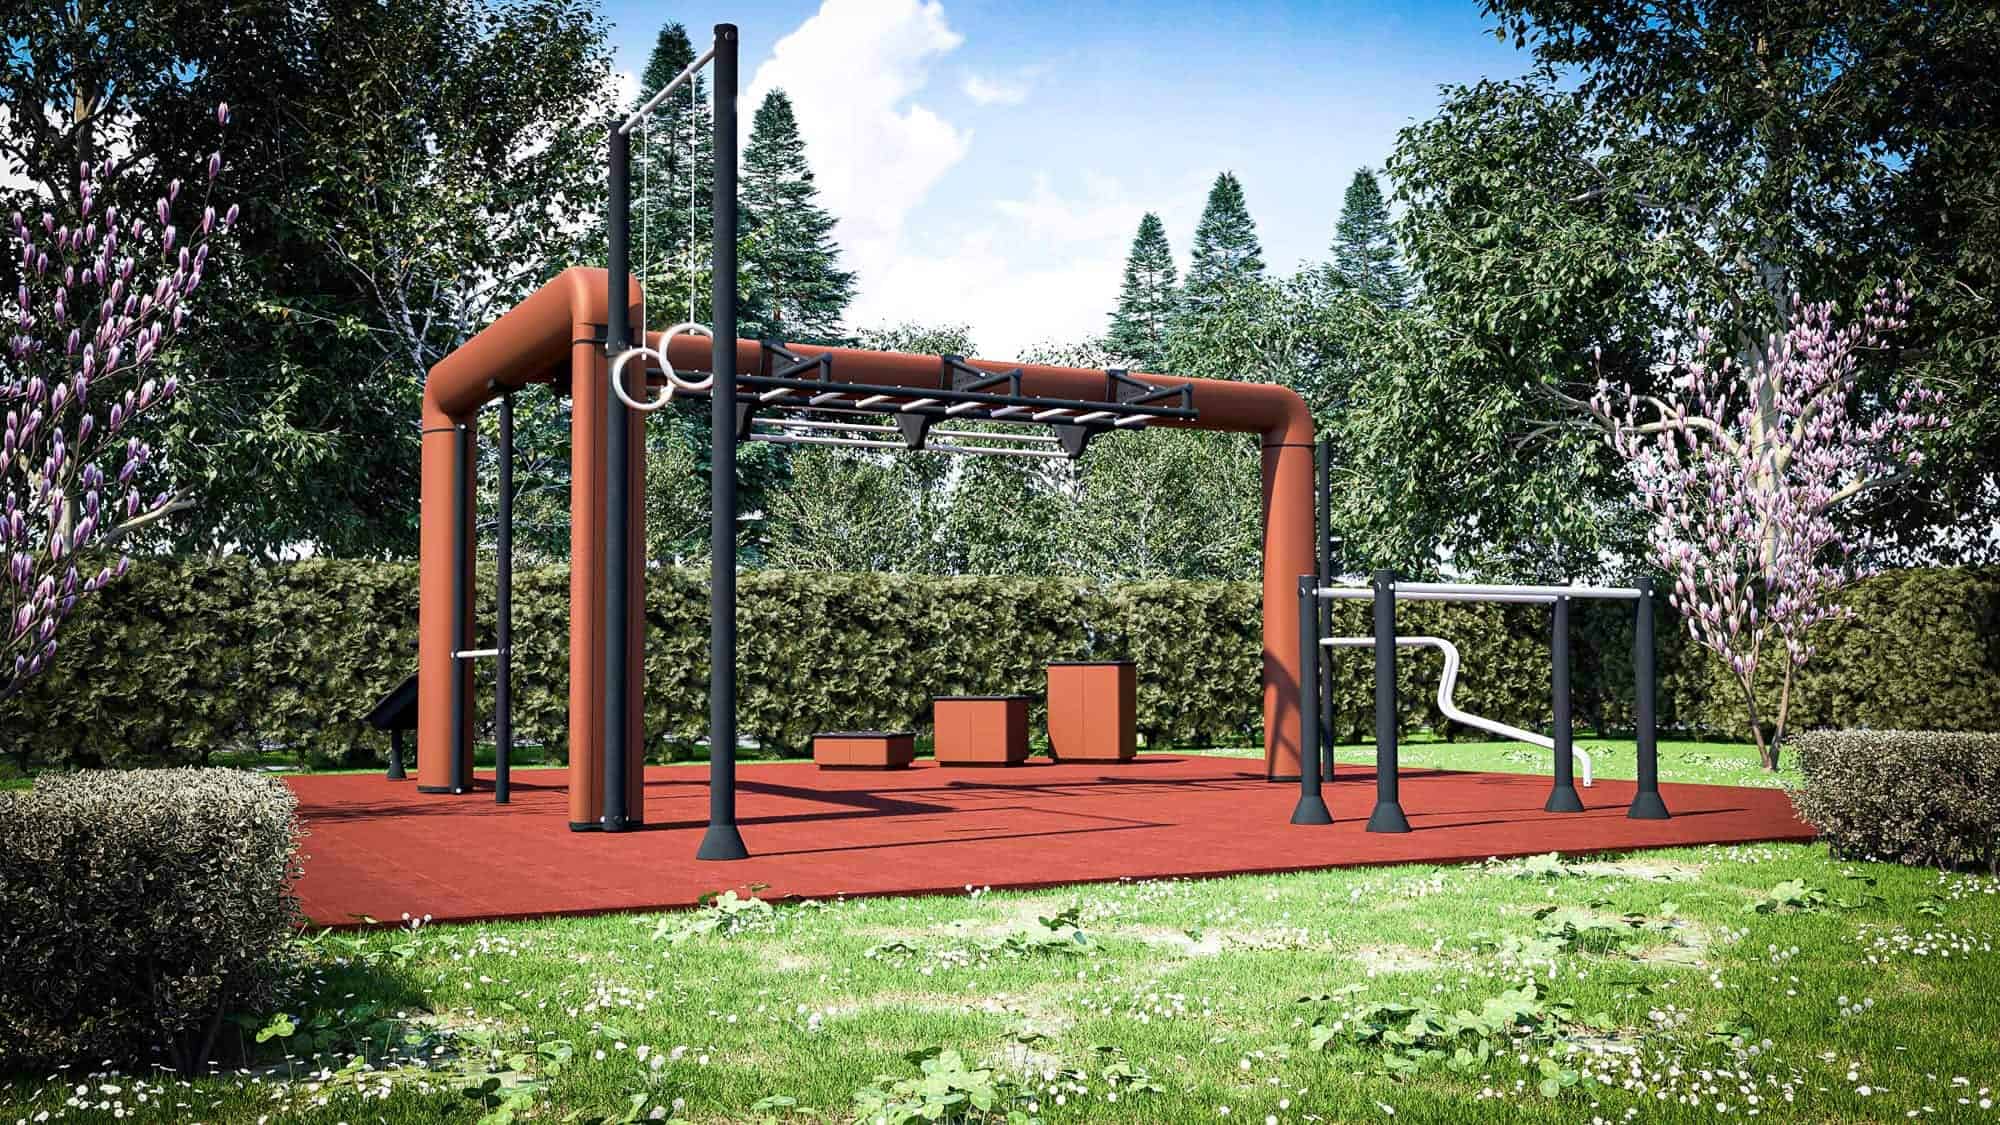 ecogym-outdoor-rubber-flooring-floor-public-areas-area-space-park-parks-beaches-40-island-anti-trauma-agglomerated-granules-outrace-t6-public-island-playground-rack